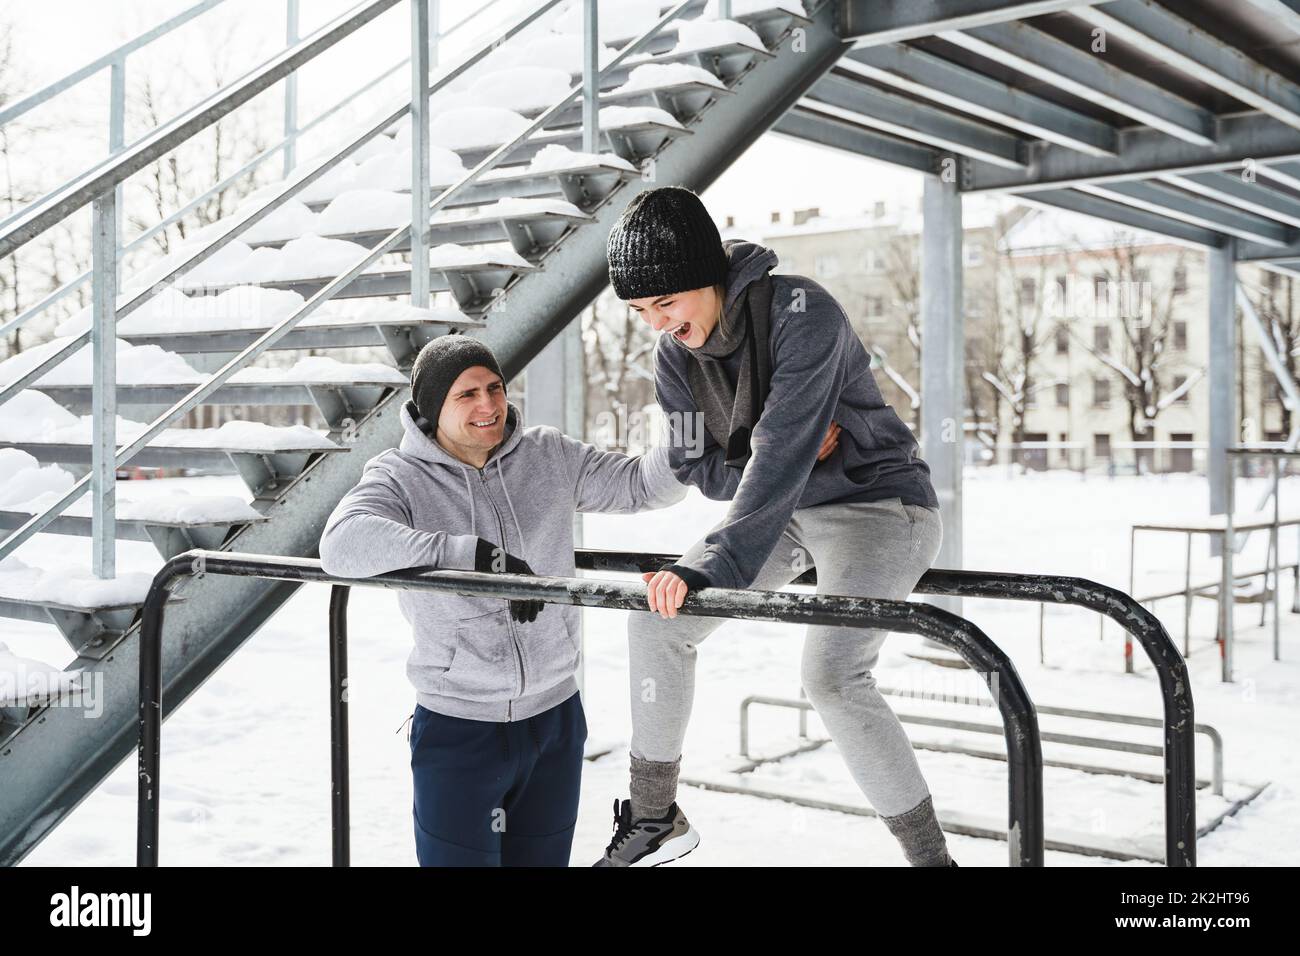 Young sportive couple during calisthenics workout during winter Stock Photo